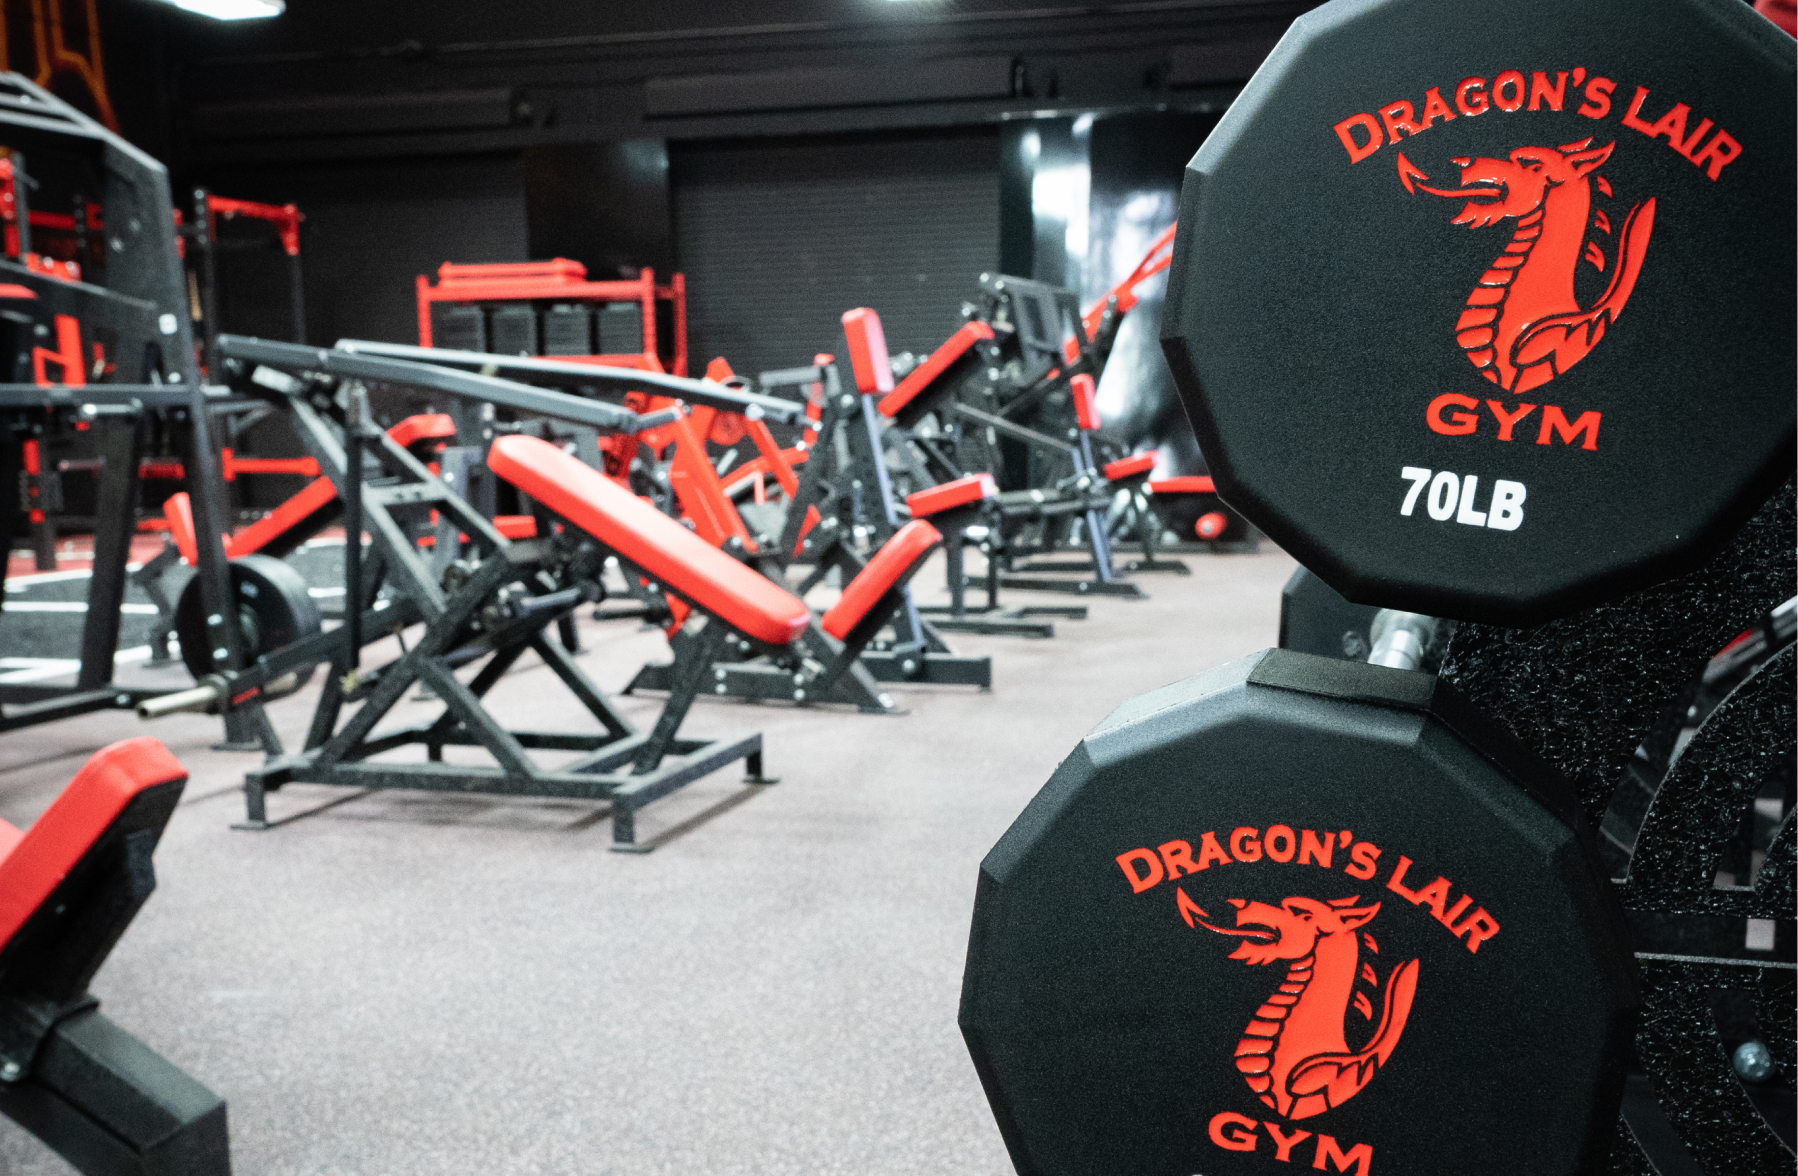 Dragon's Lair Gym - Las Vegas - While supplies lasts, spend $100 or more in  the Pro Shop and receive a free Dragon's Lair Gym Zip-Up Hoodie. This offer  is available in-store